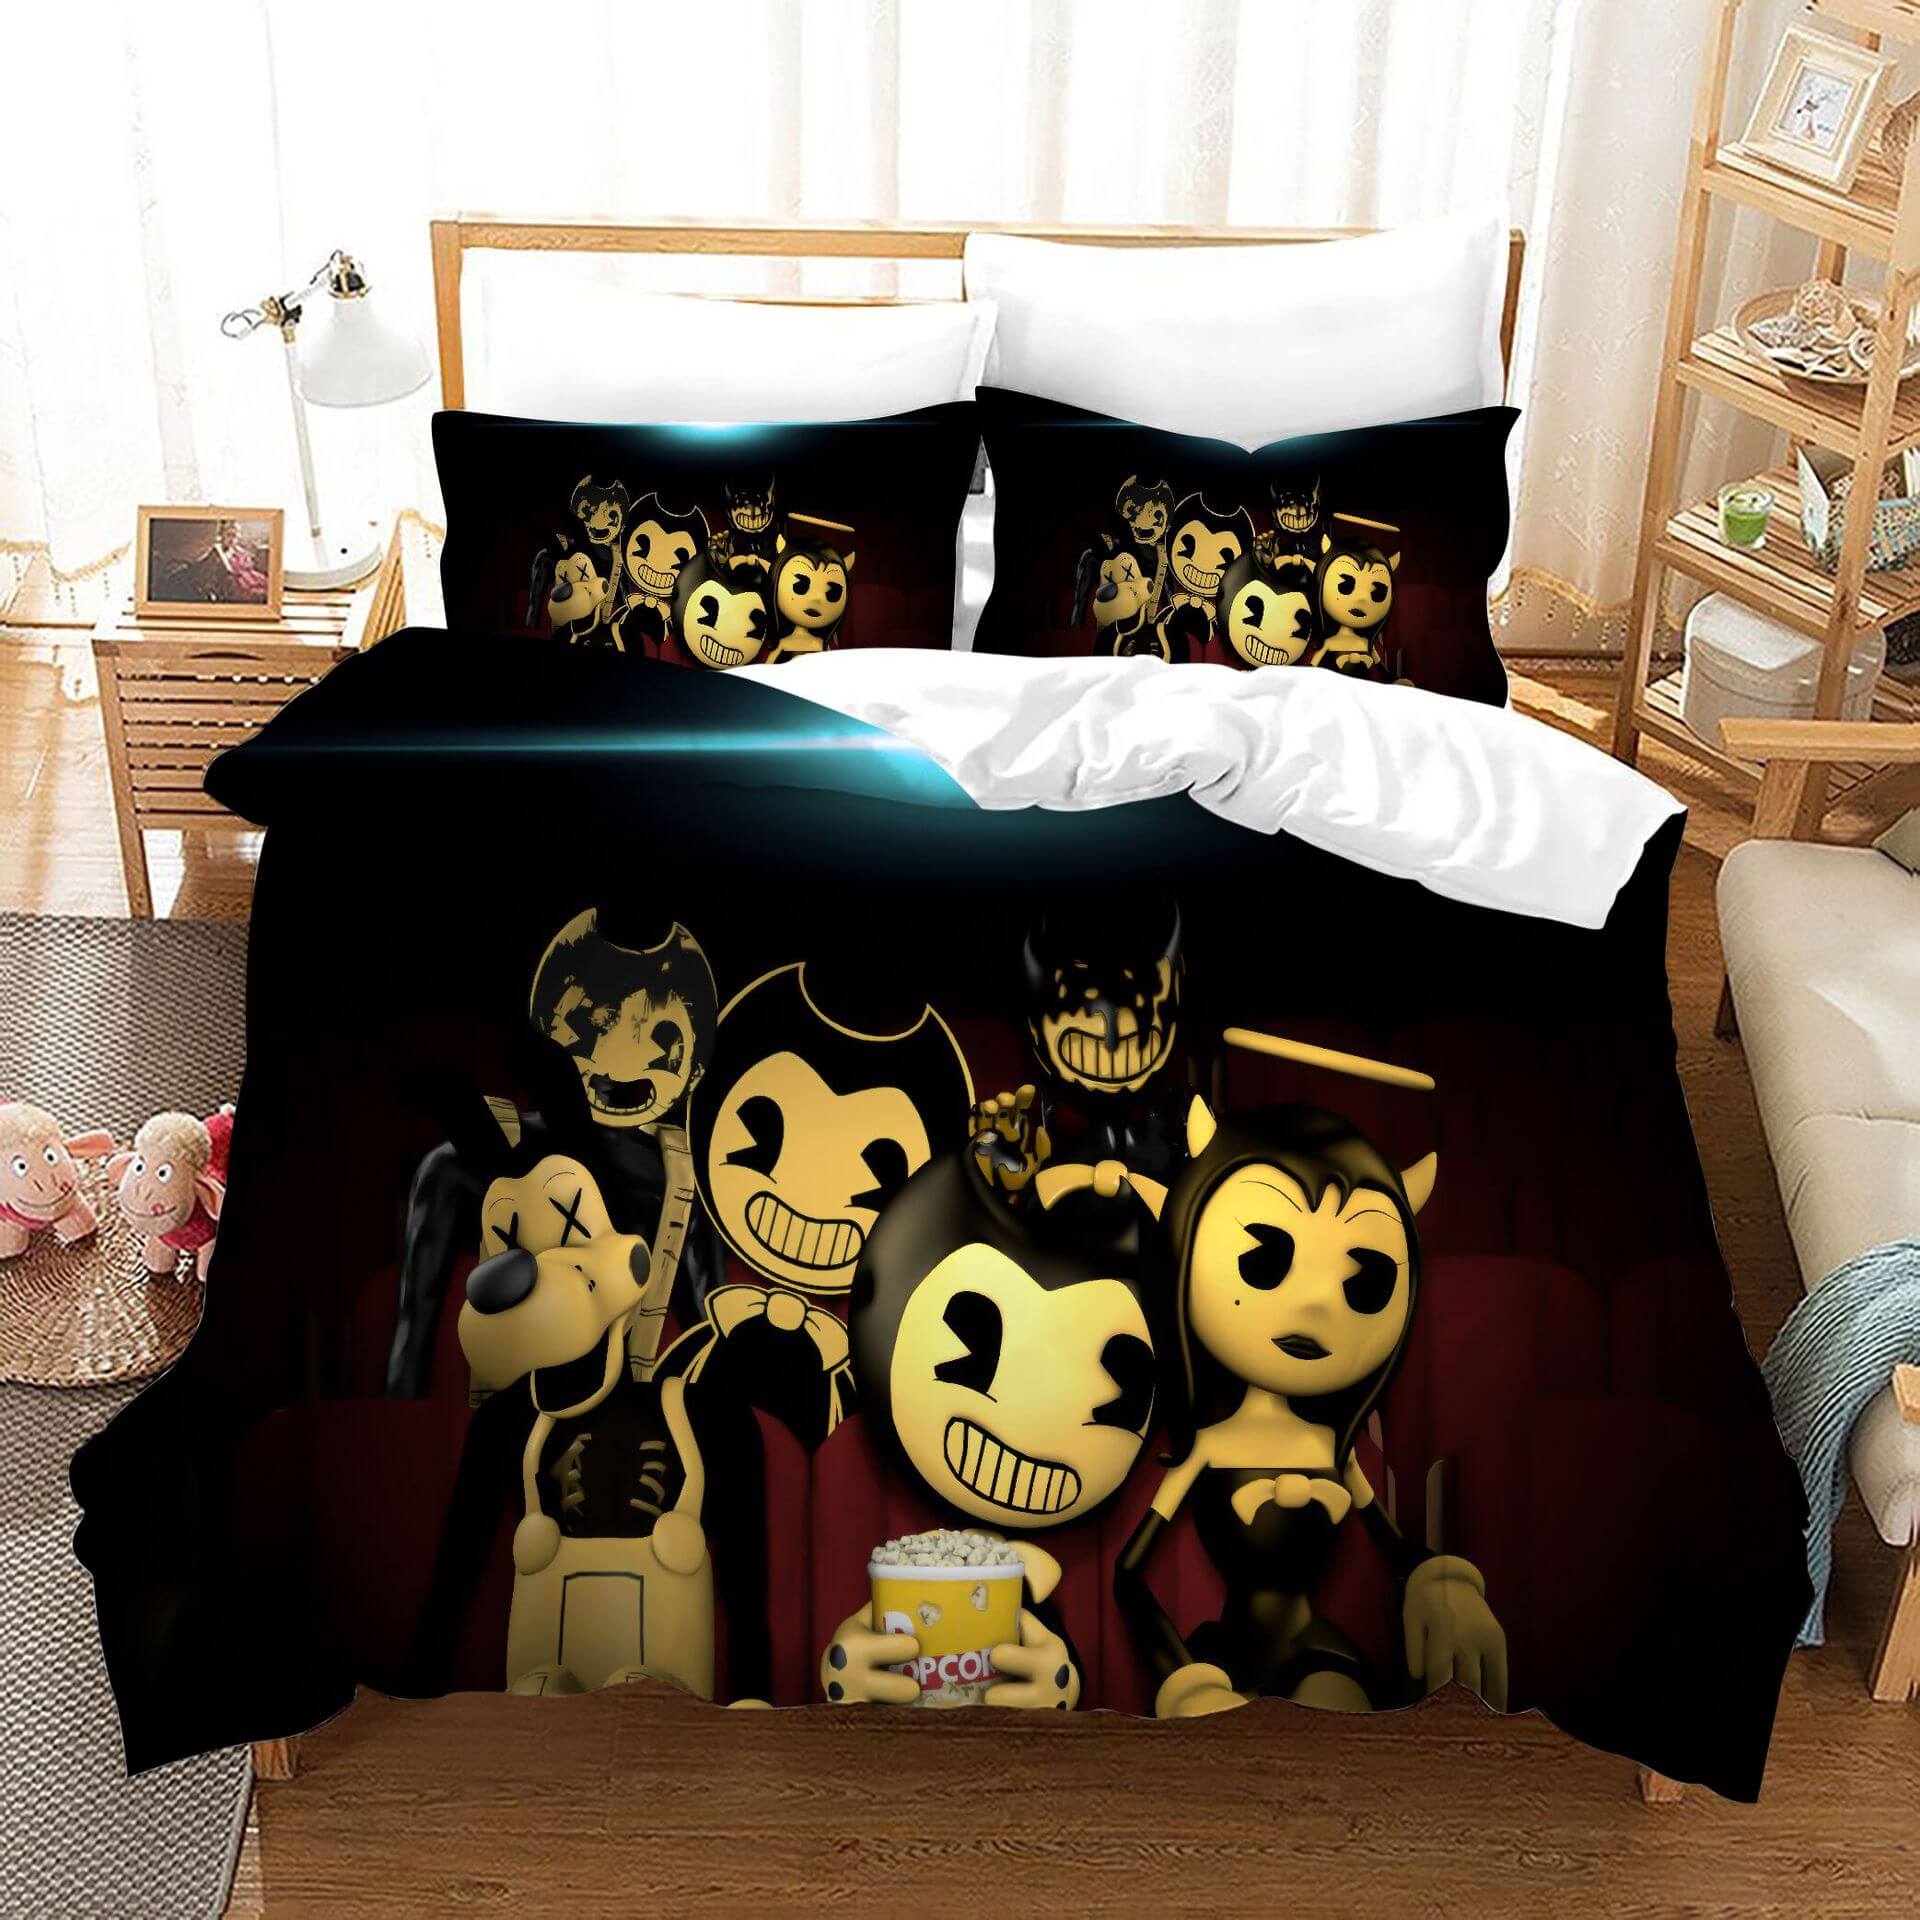 Bendy And The Ink Machine Bedding Set Duvet Cover